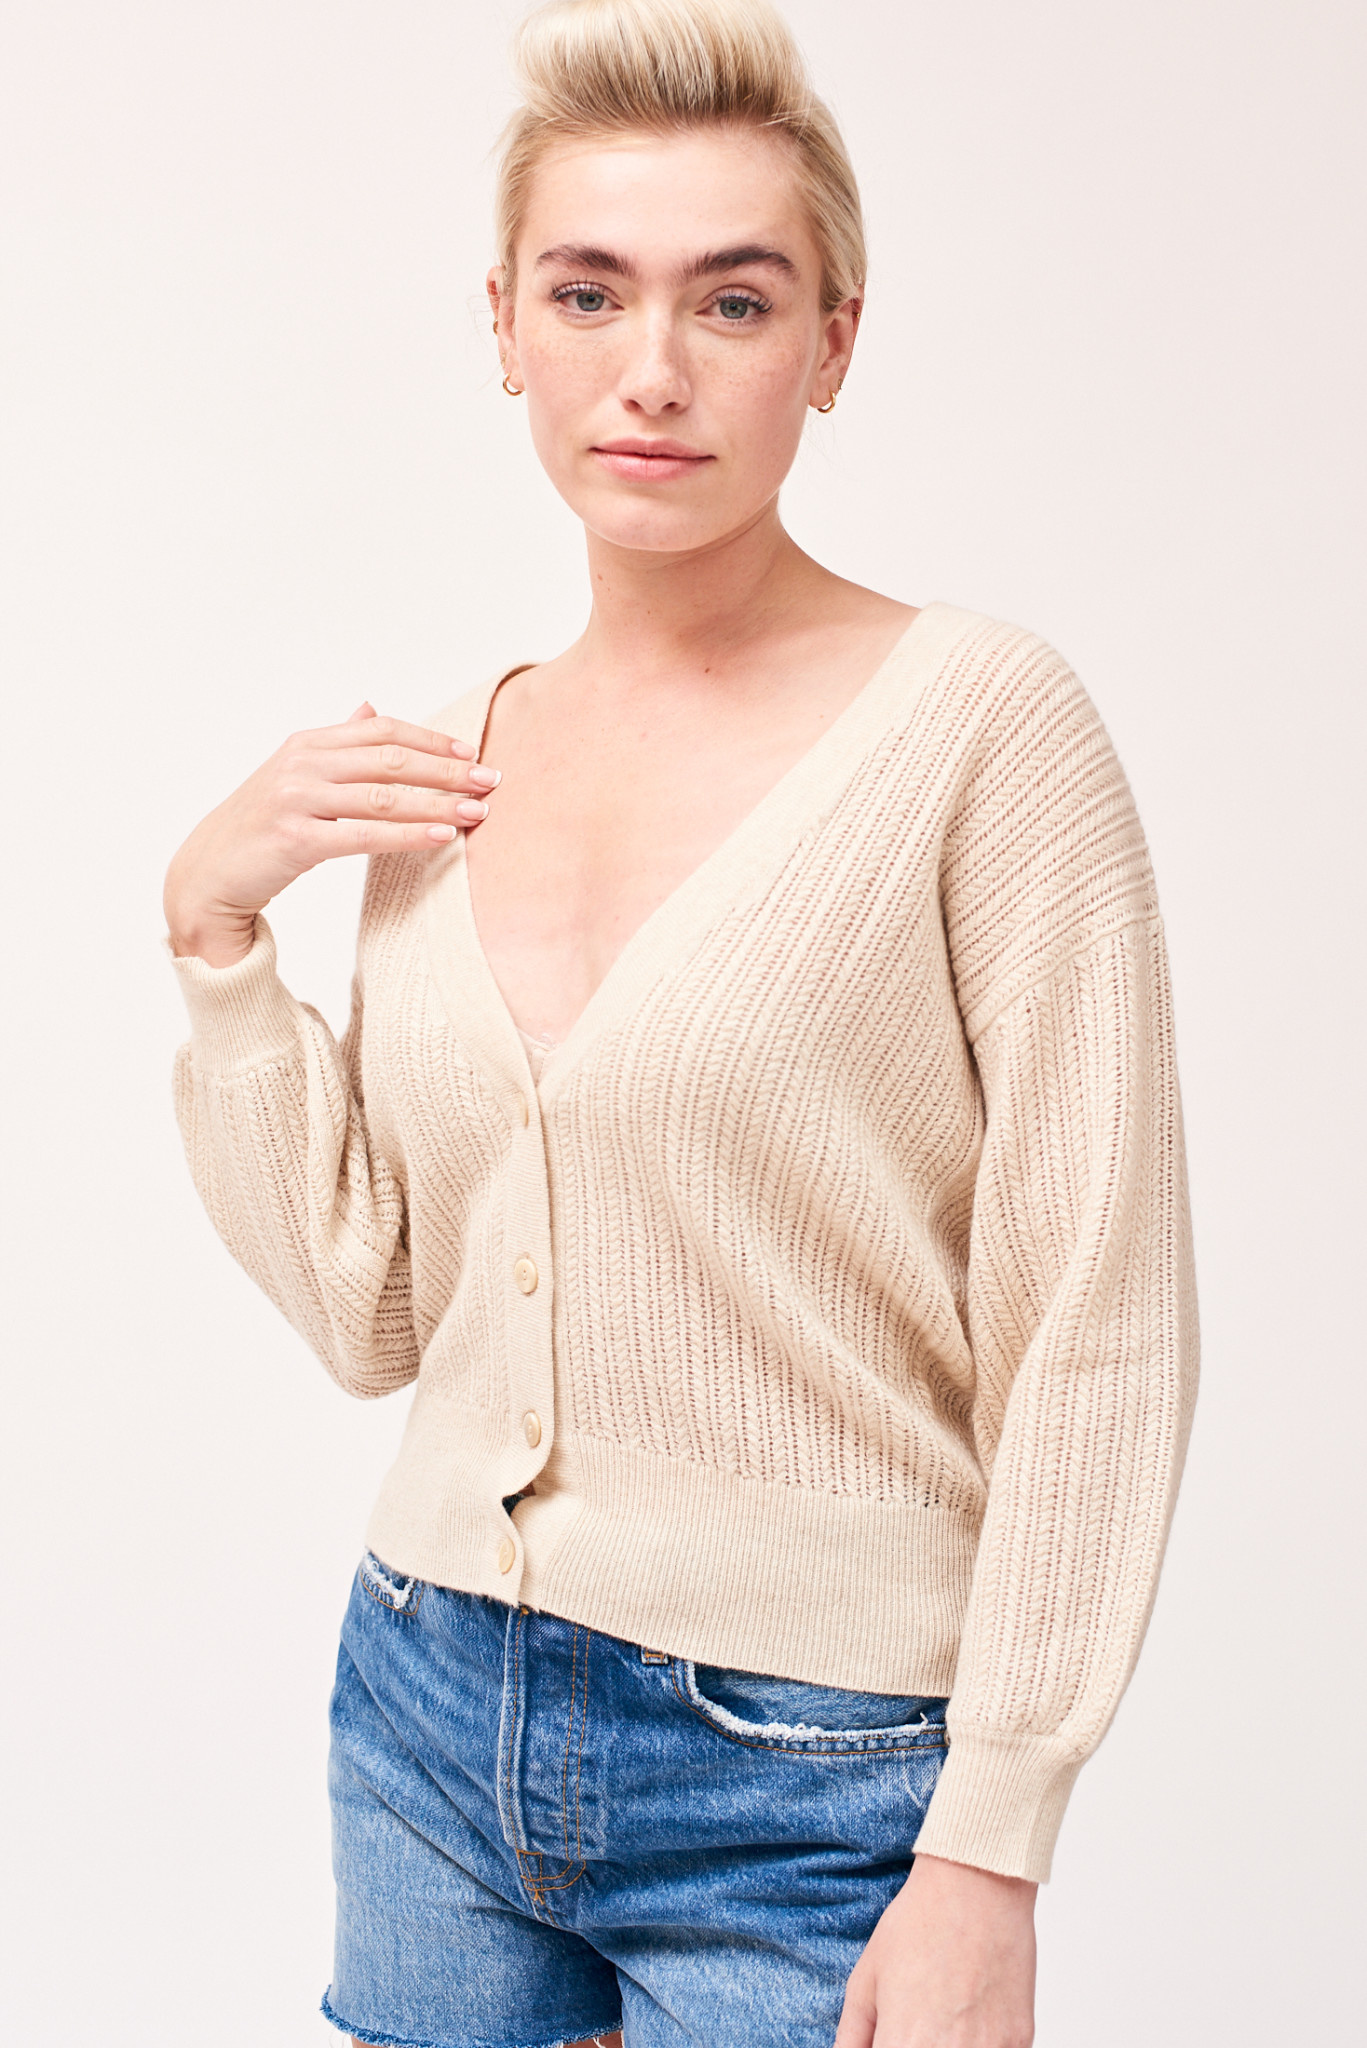 Dress up or down with Jumper 1234 Open Cardigan in Oatmeal - I Am More  Scarsdale